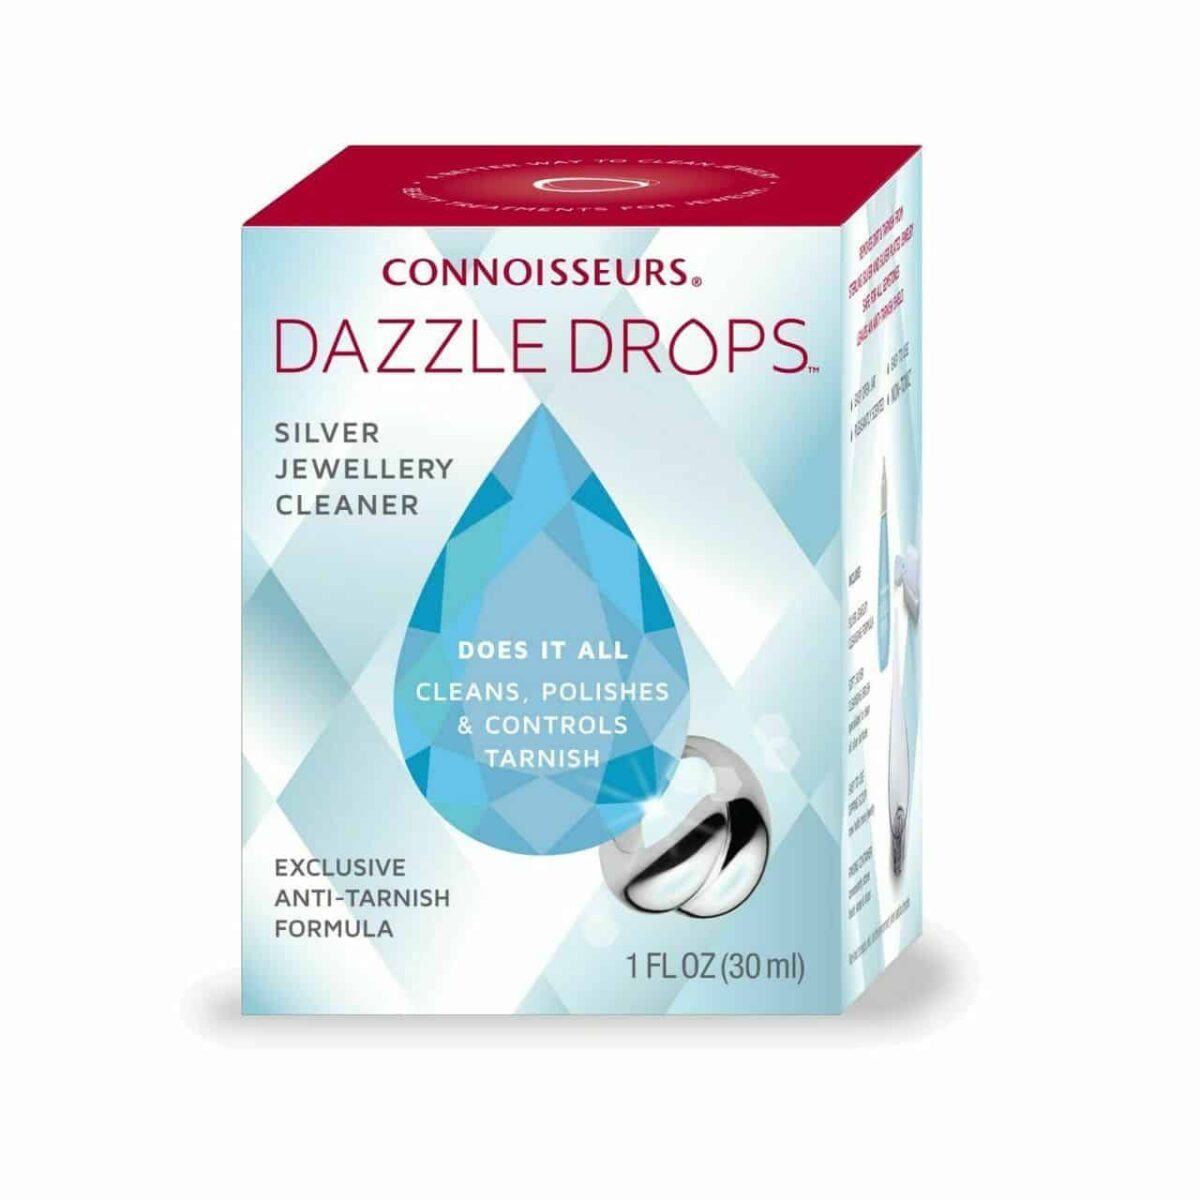 Connoisseurs Dazzle Drops SILVER Jewellery Watch Cleaner Polish Sterling Silver 193877667733 2